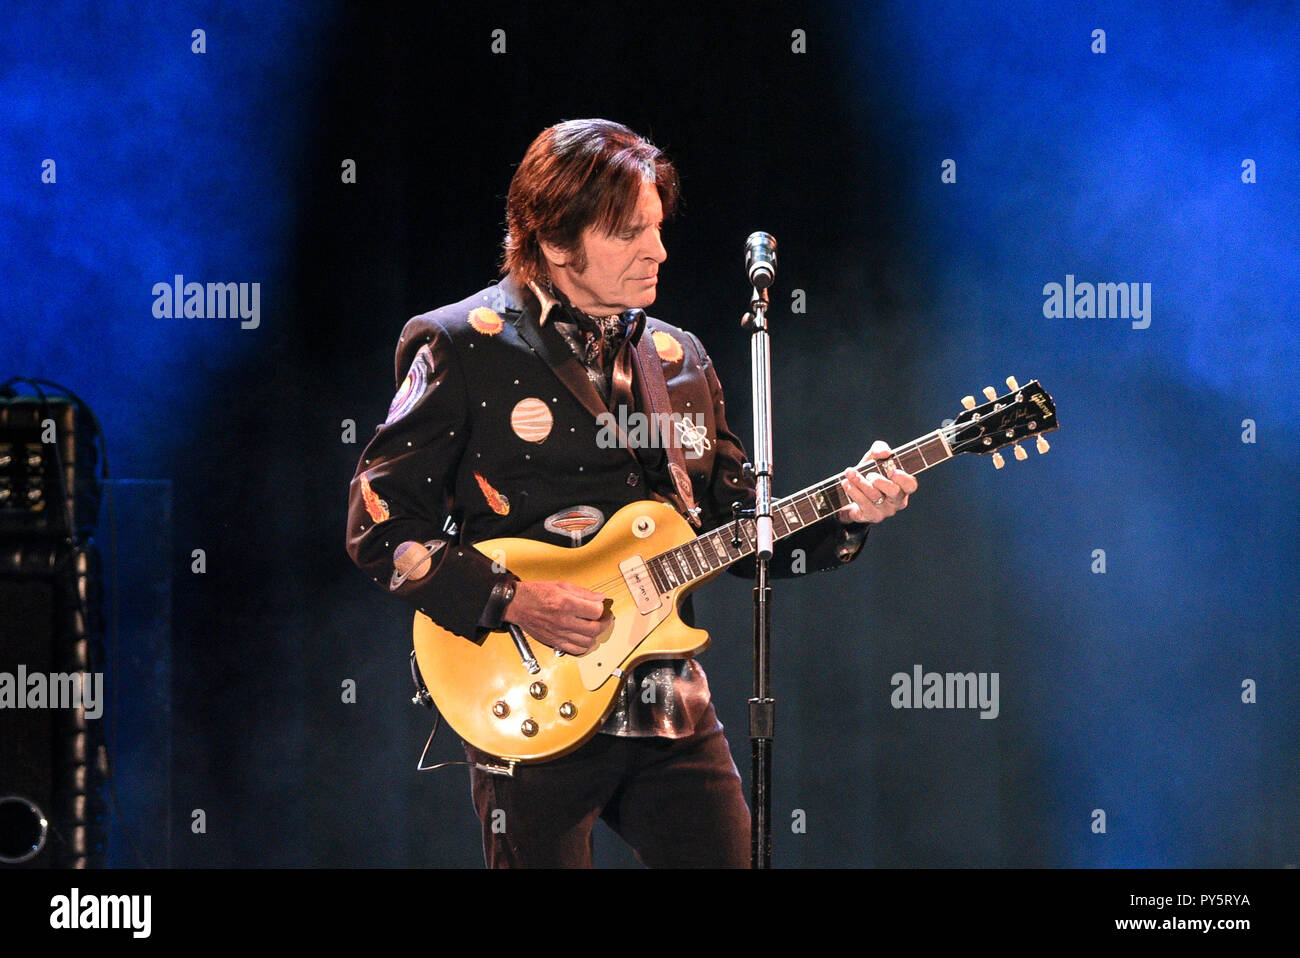 London, UK. 25th October, 2018. Singer / Guitarist and Co-founder of Creedence Clearwater Revival, John Fogerty performing at the opening night of Bluesfest at the O2 Arena, London on 25th October 2018. Credit: Peter Doherty/Alamy Live News Stock Photo